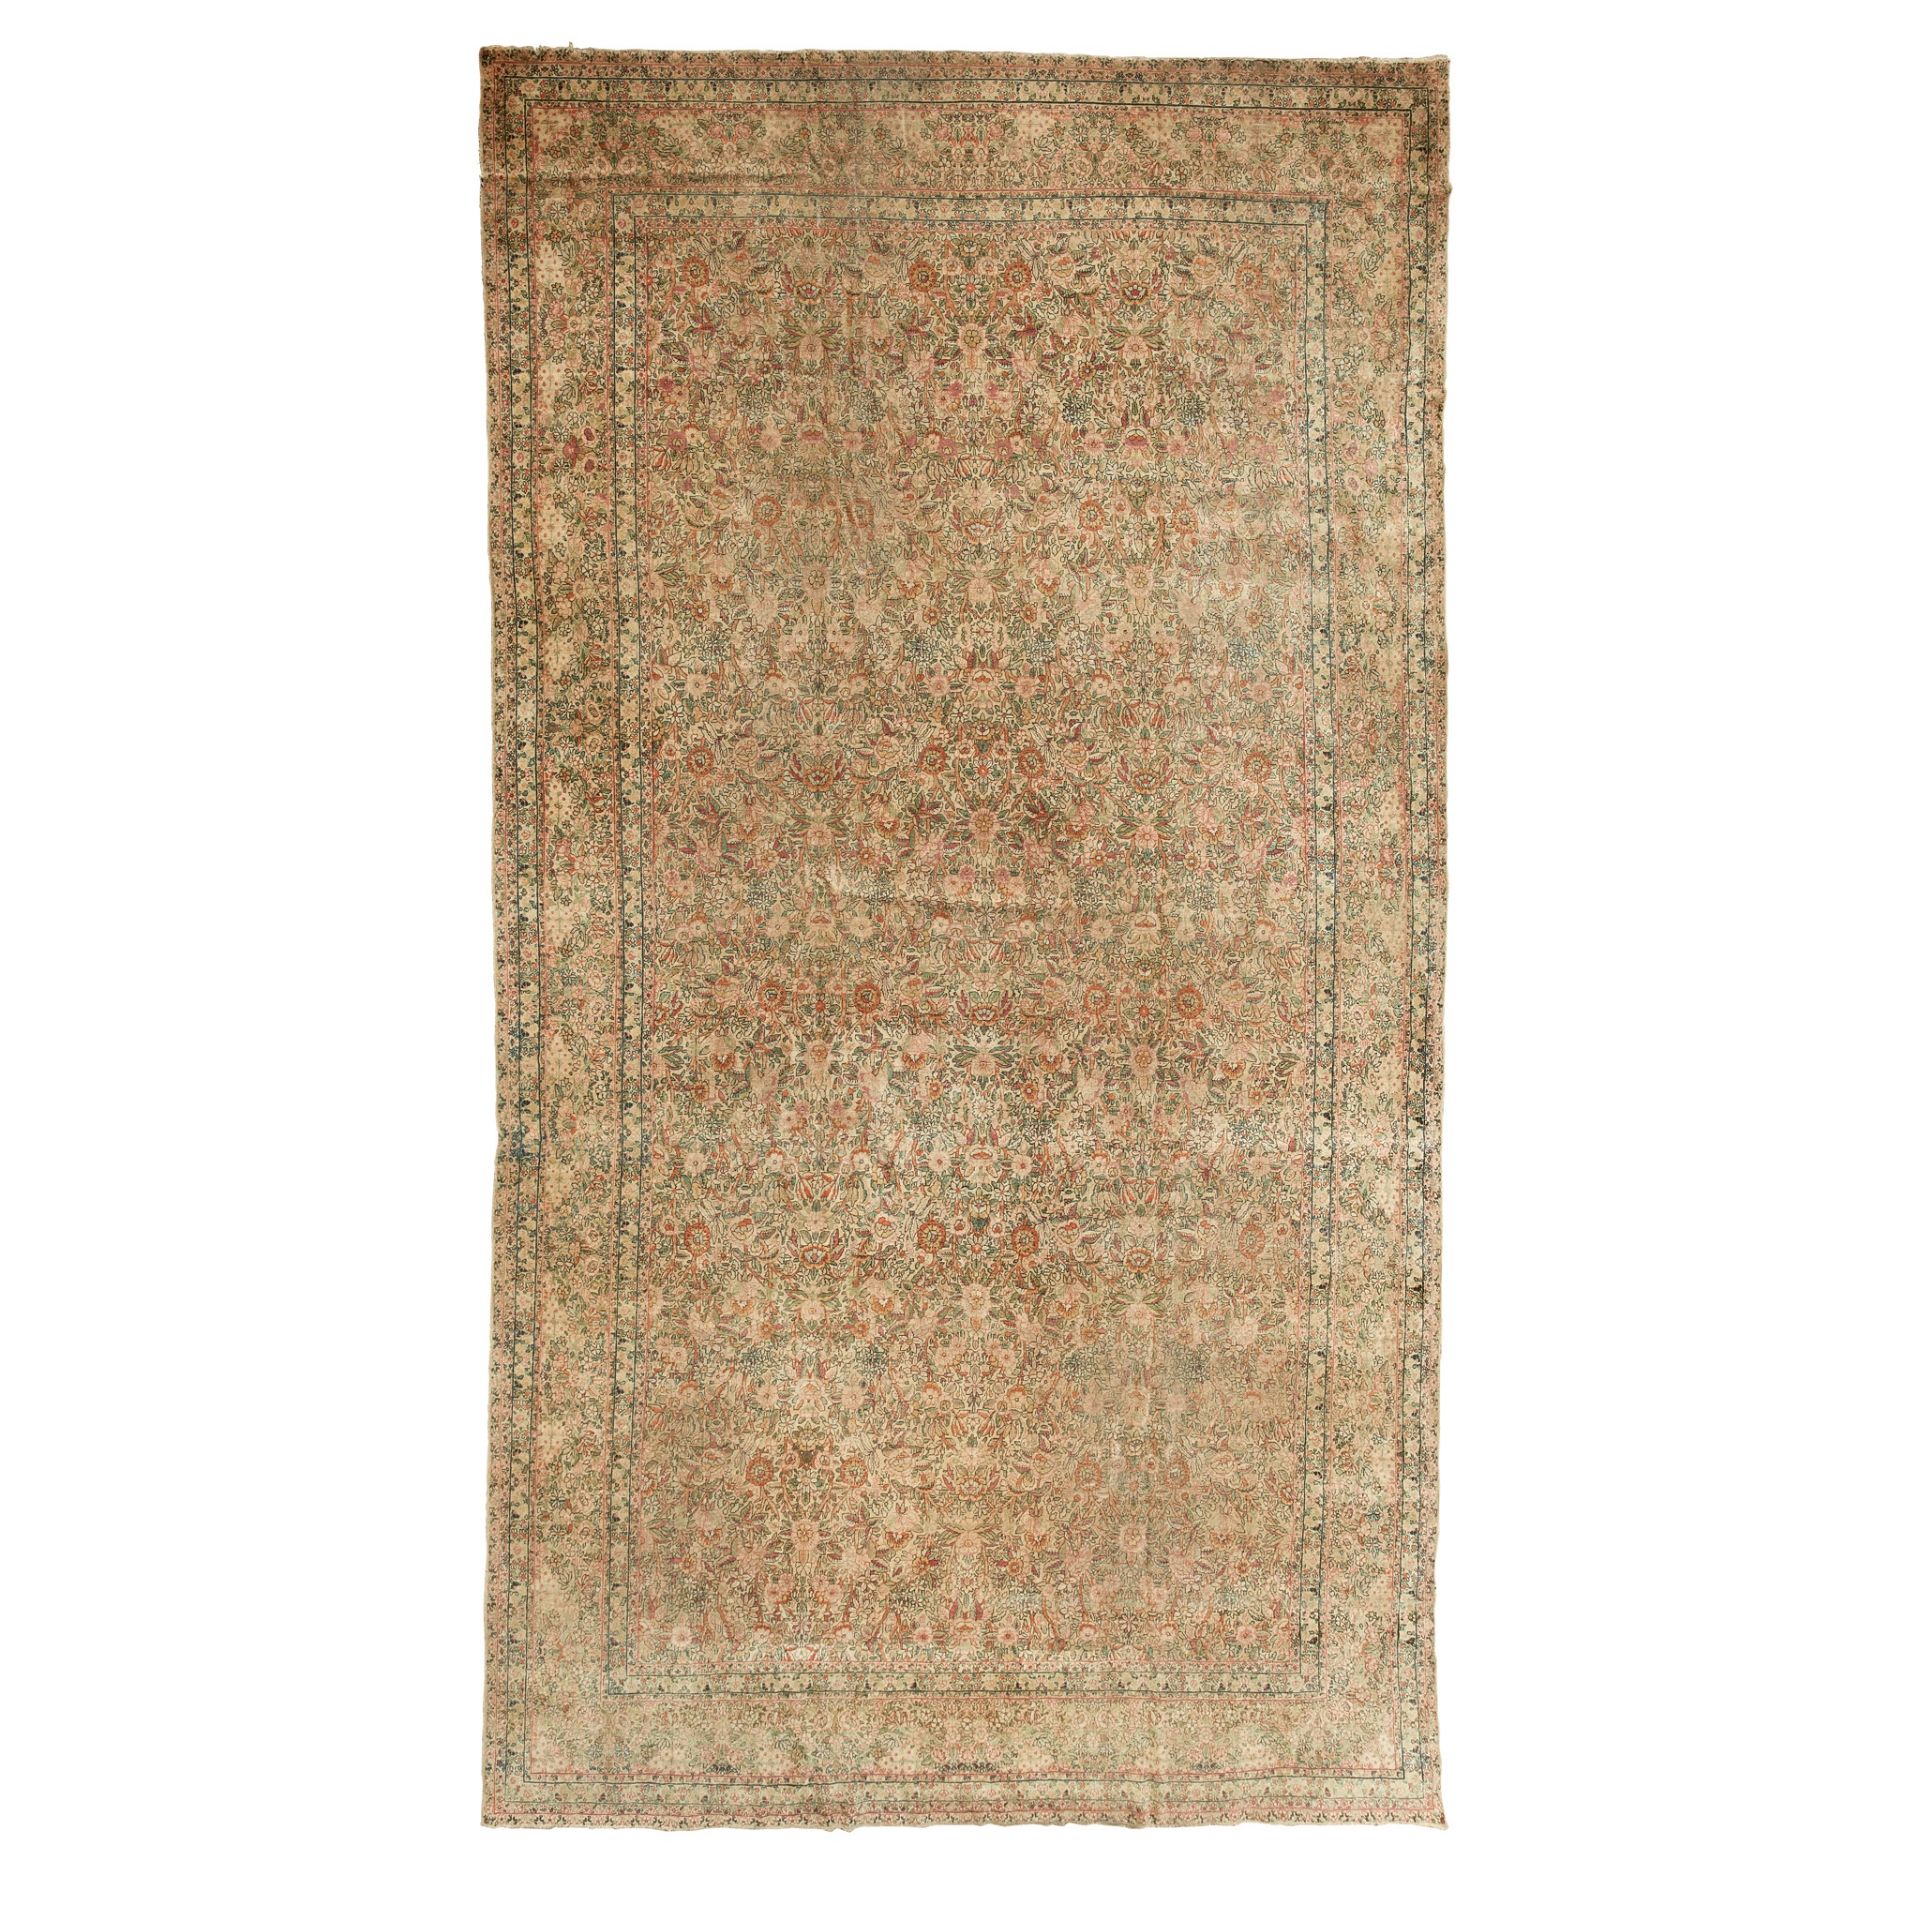 LARGE KIRMAN CARPET CENTRAL PERSIA, LATE 19TH/EARLY 20TH CENTURY